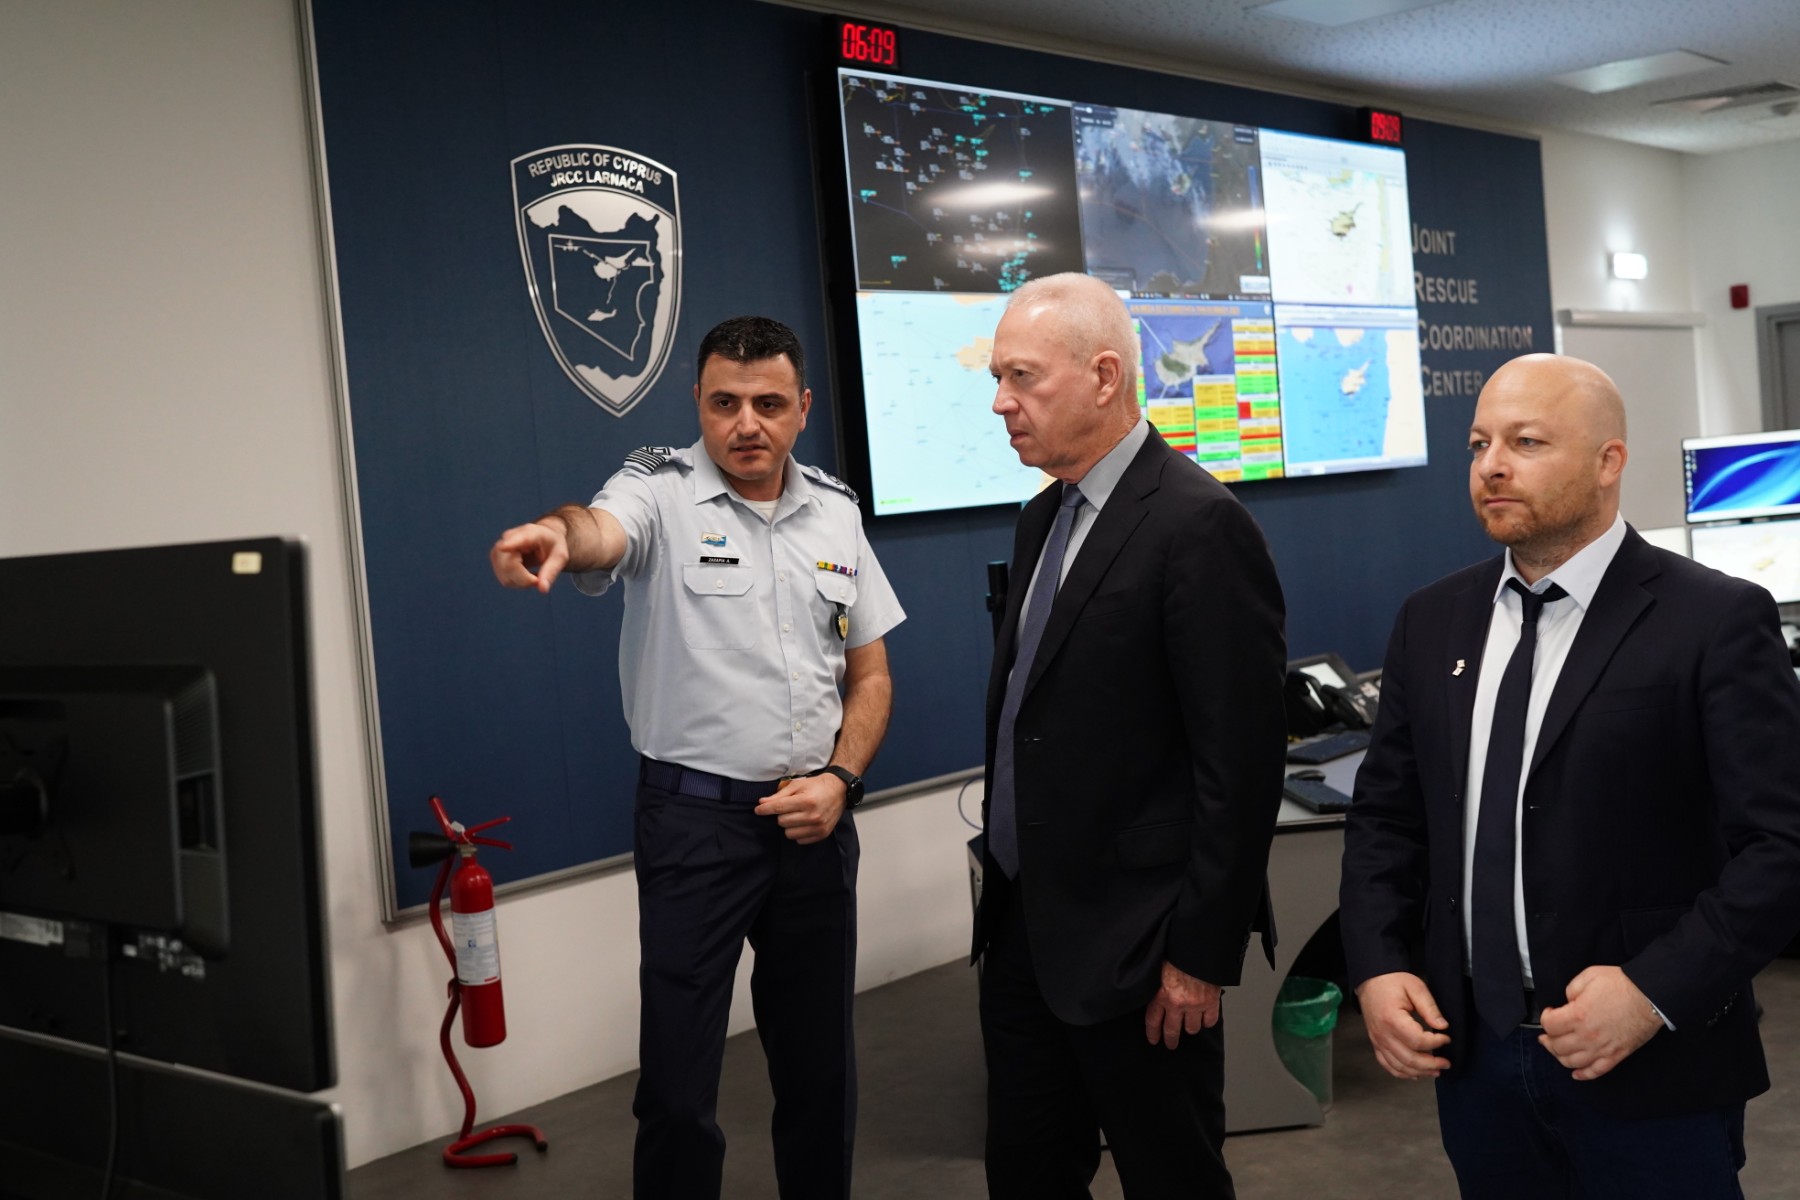 Informative visit of the Minister of Defence of Israel to the JRCC